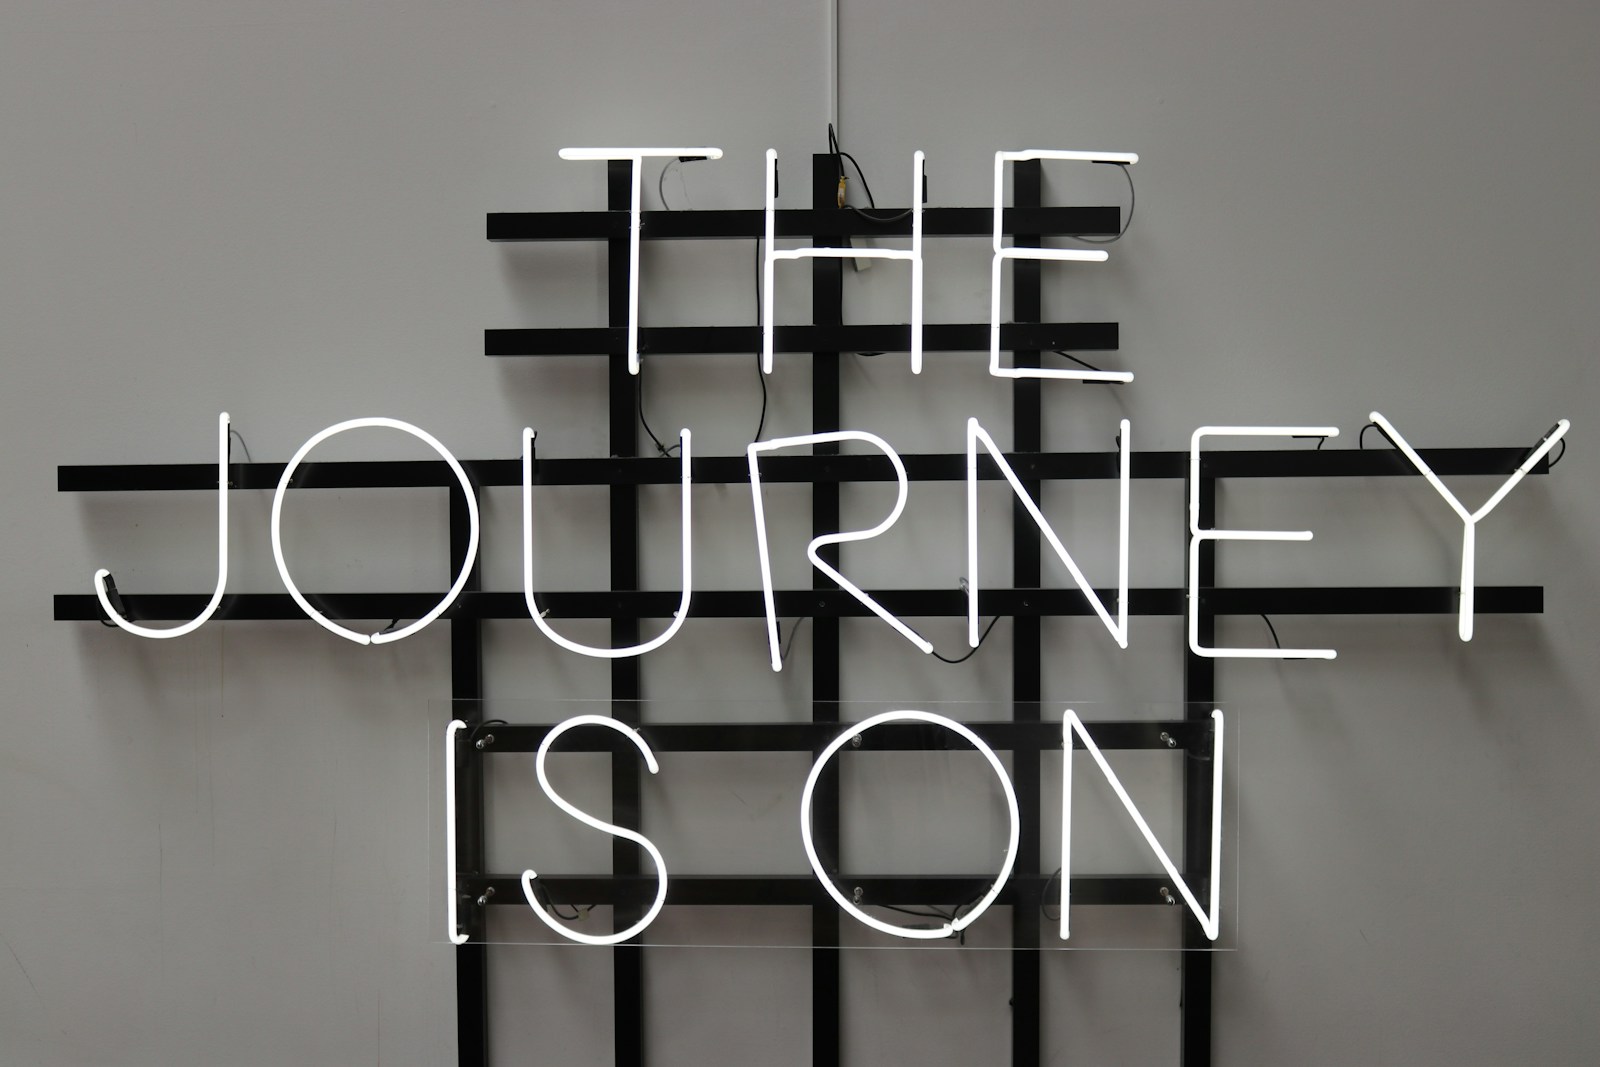 The Journey is On LED Banner